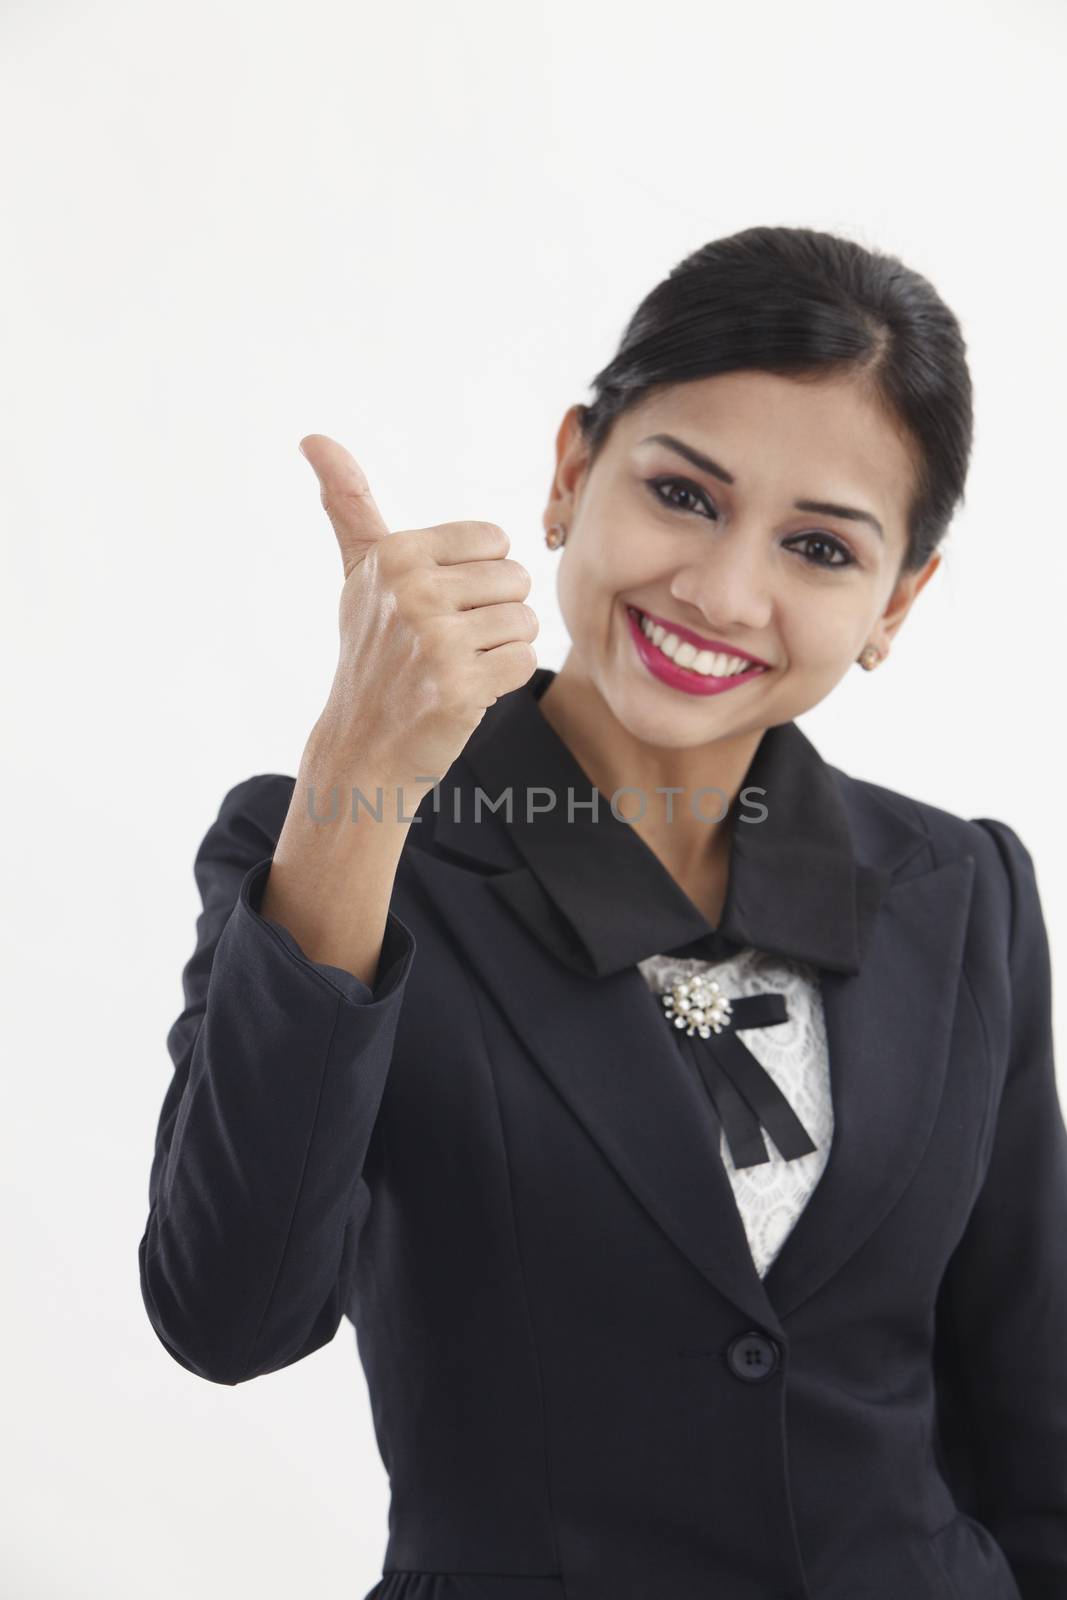  formal Asian Business woman with thumbs up